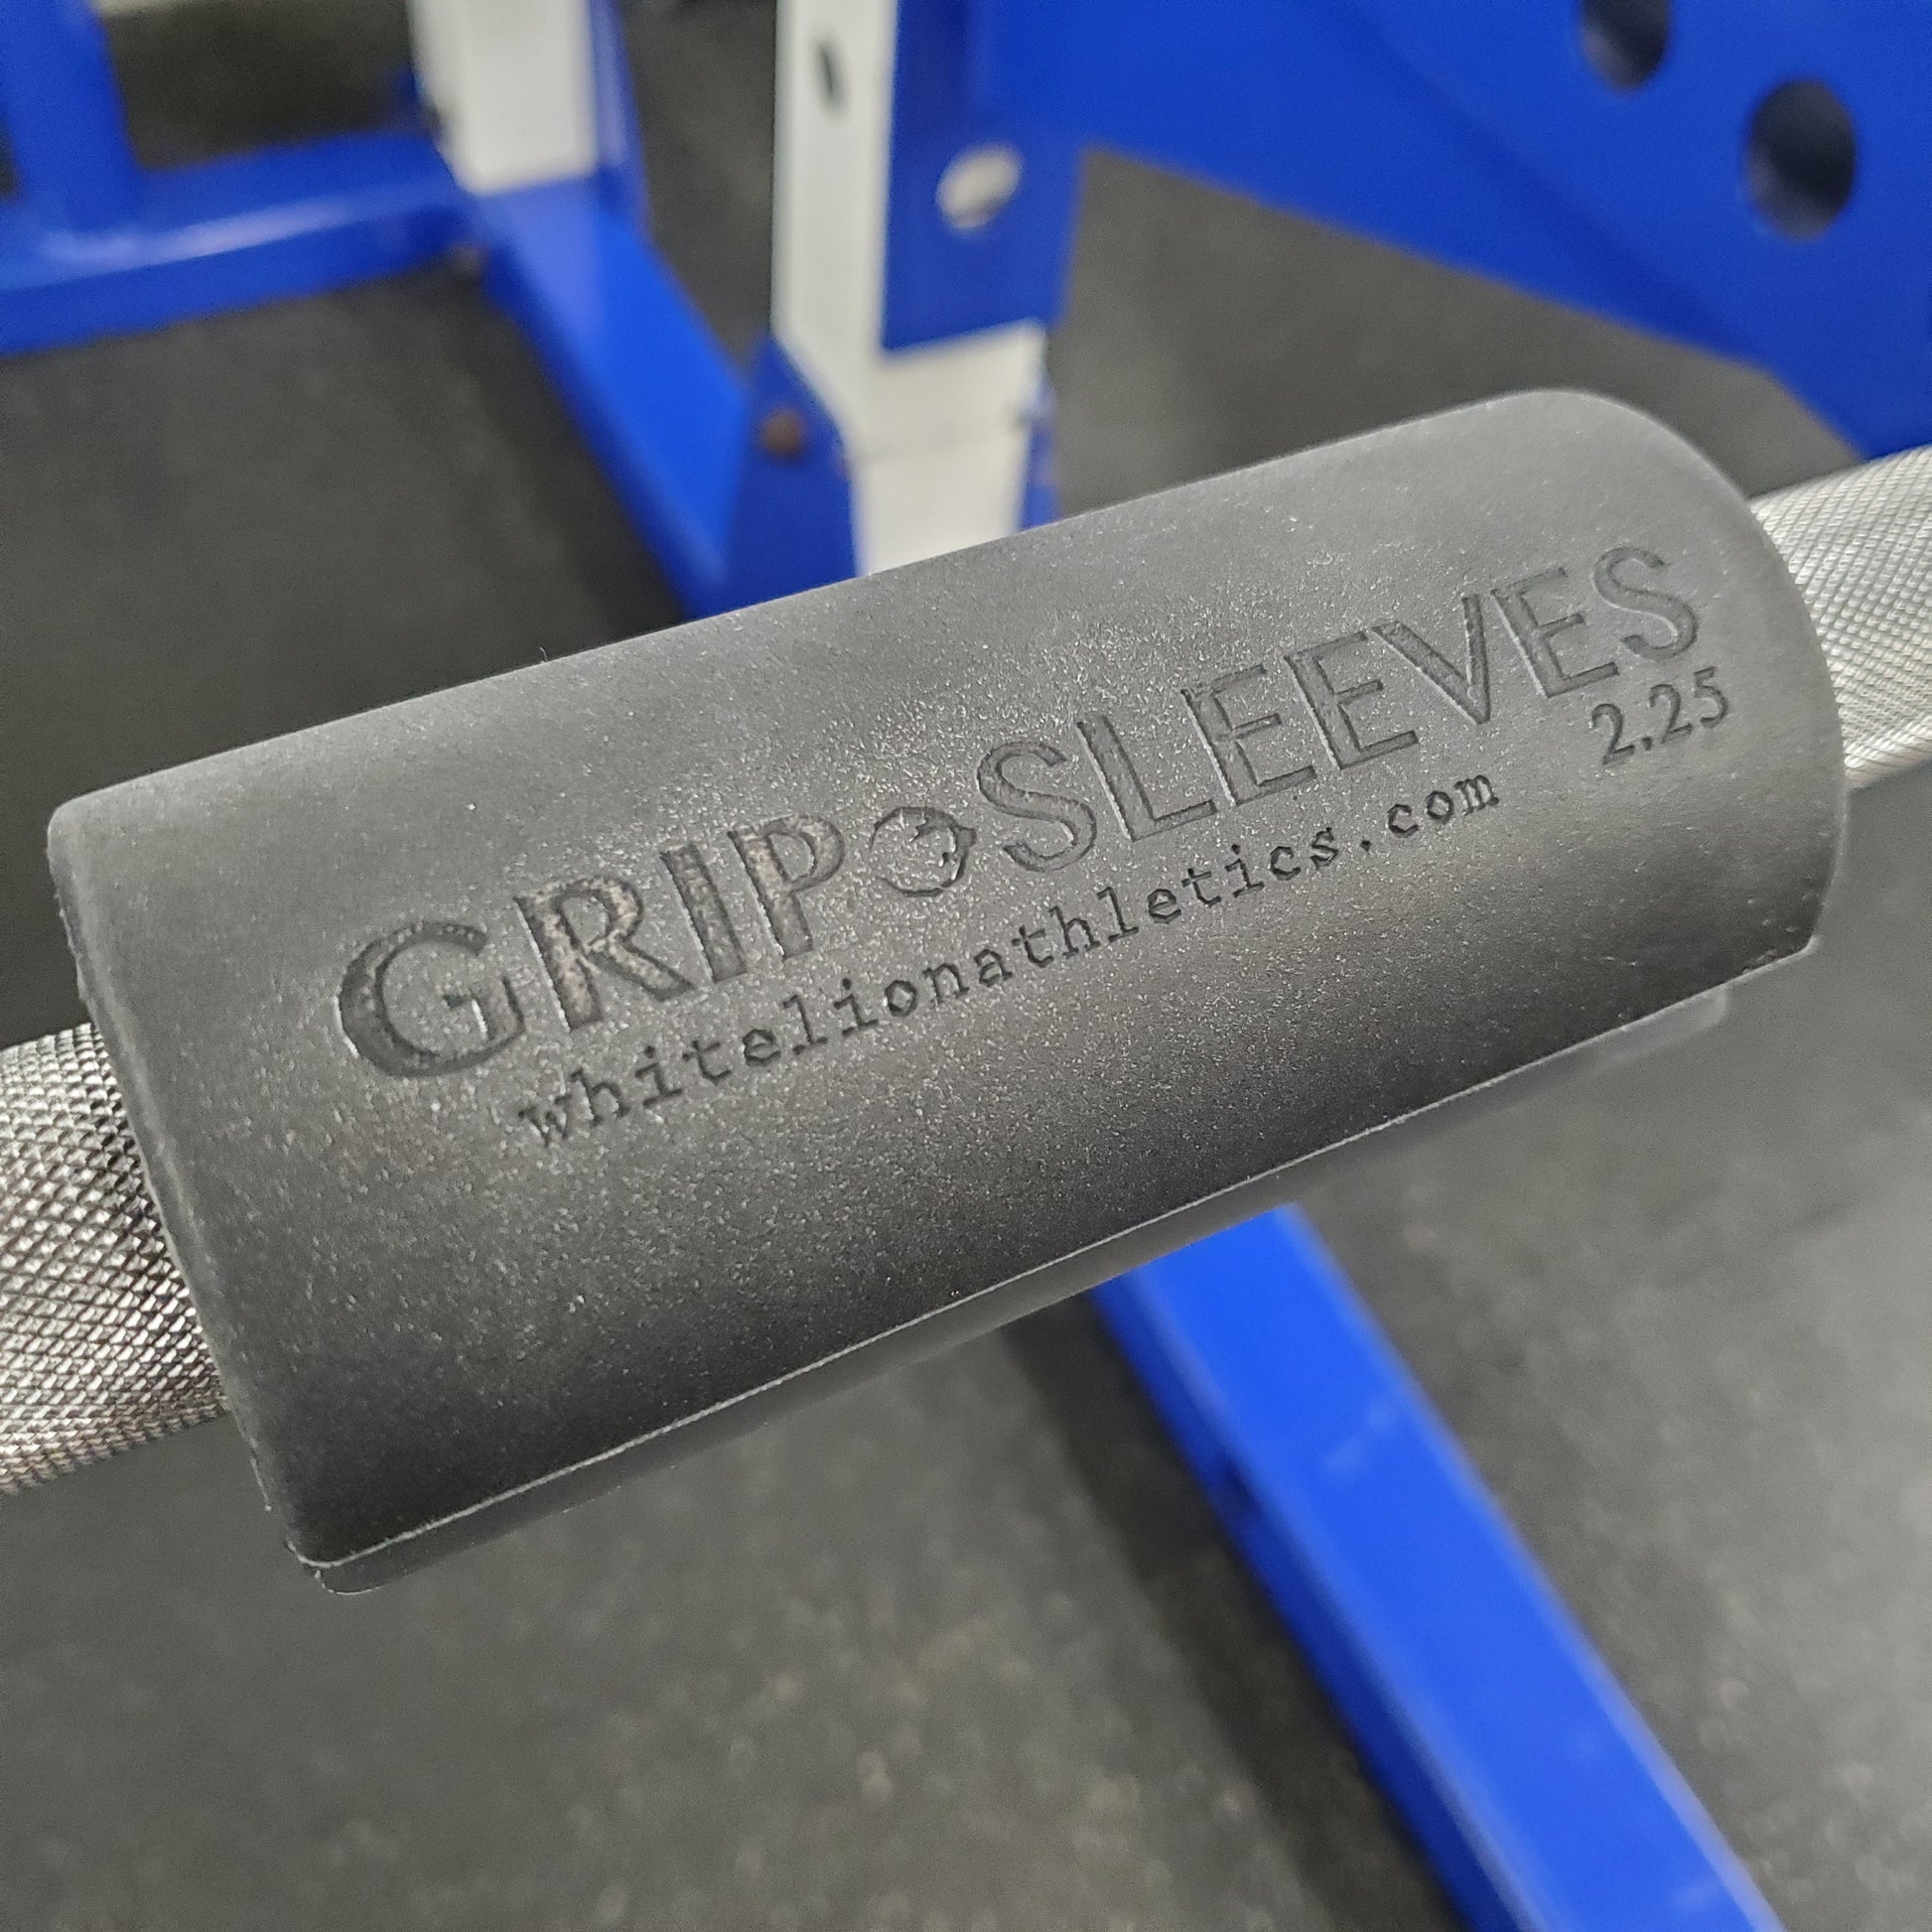 2.25" Grip Sleeves for grip strength training 